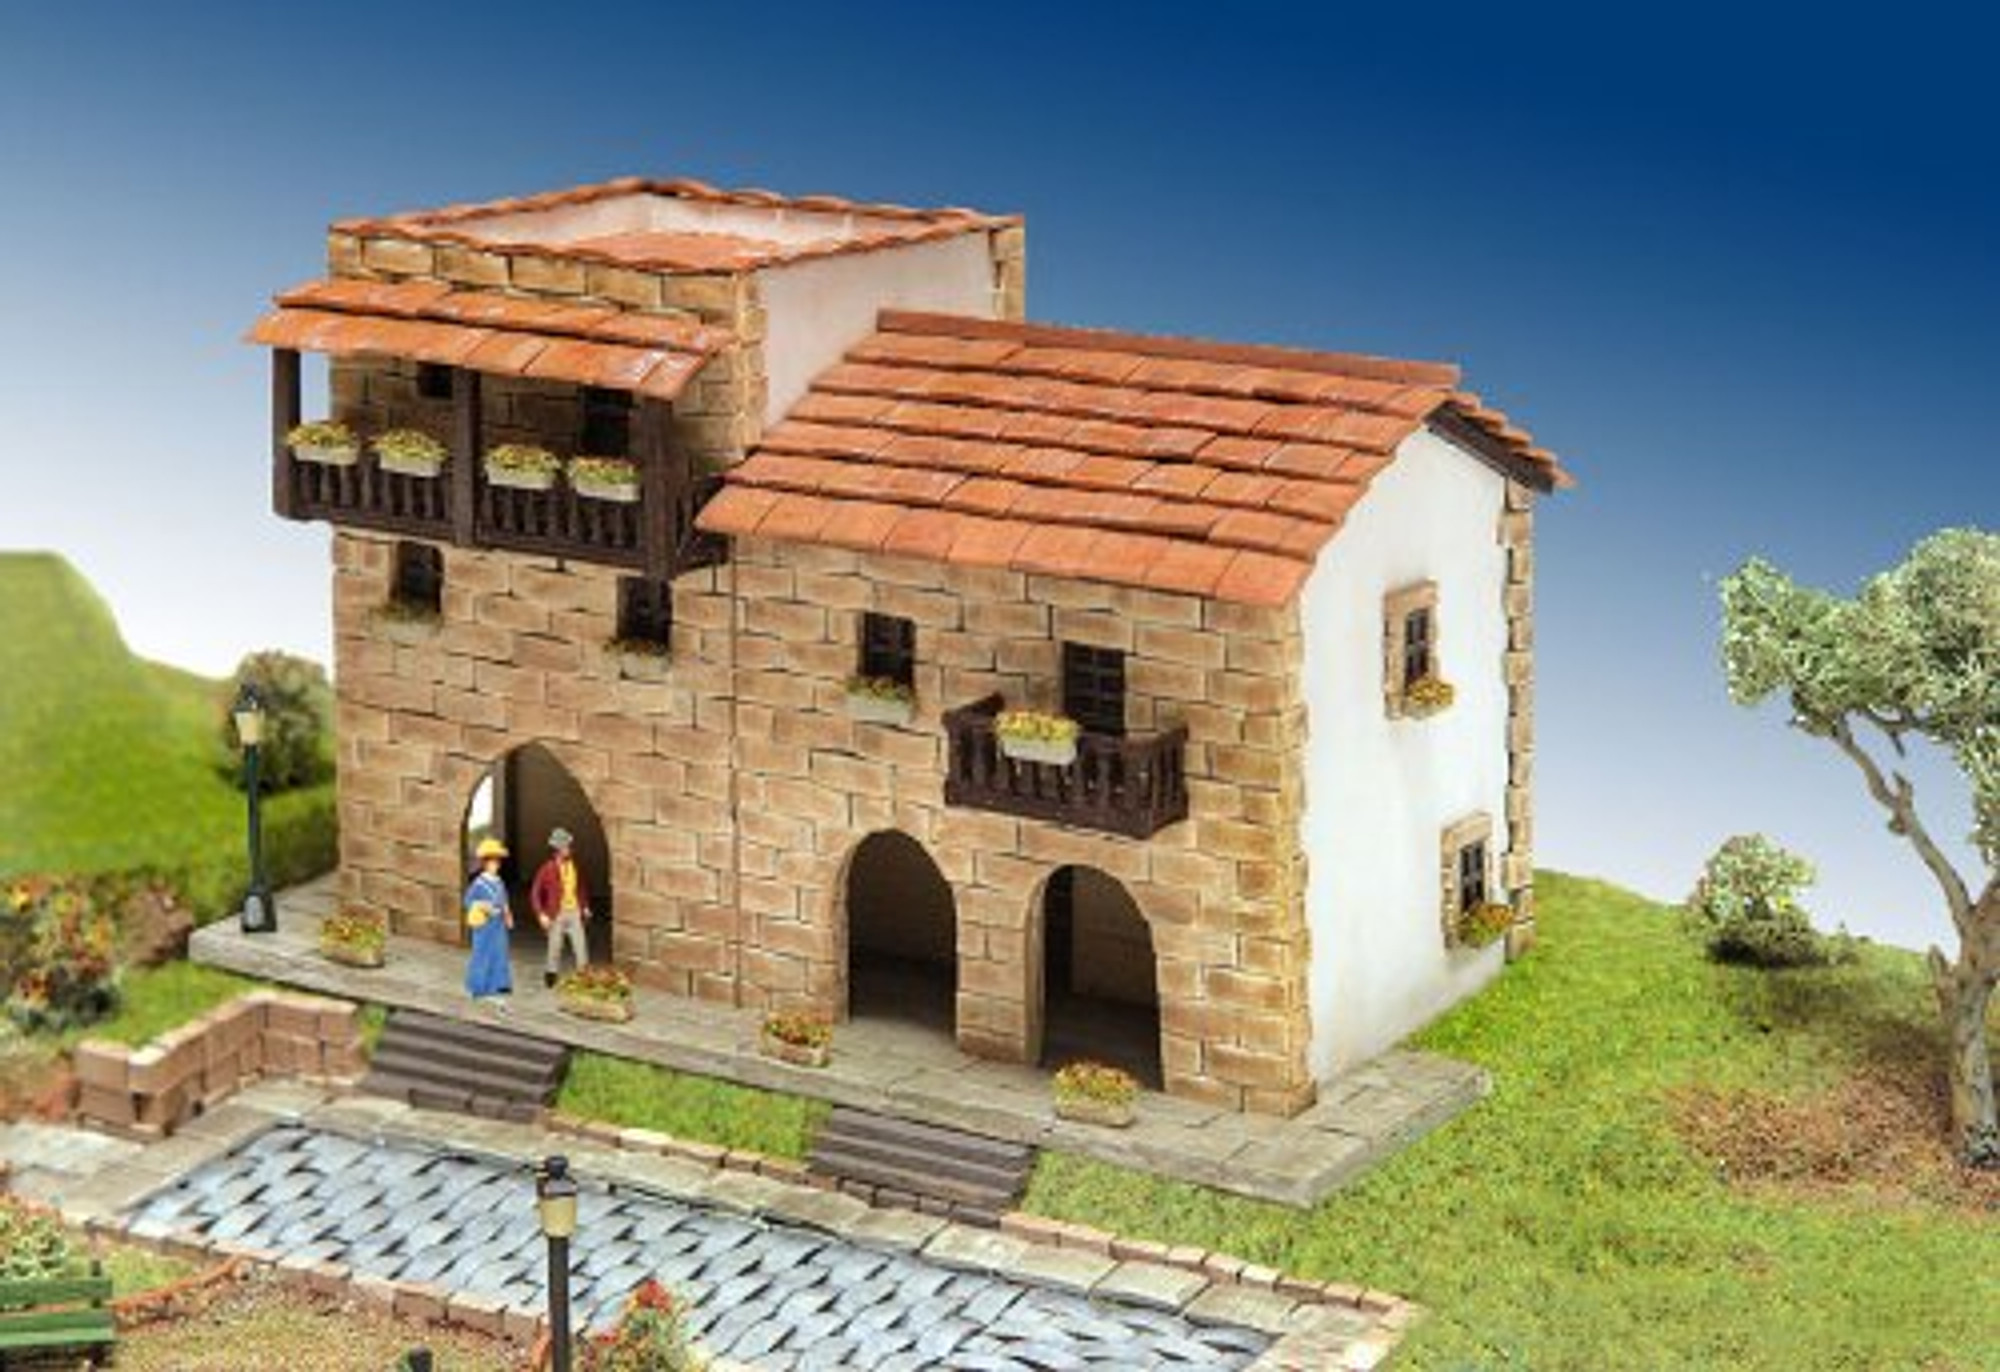 Palacete Casa Rural Country House Architectural Model Kit by Domus Kits  40208